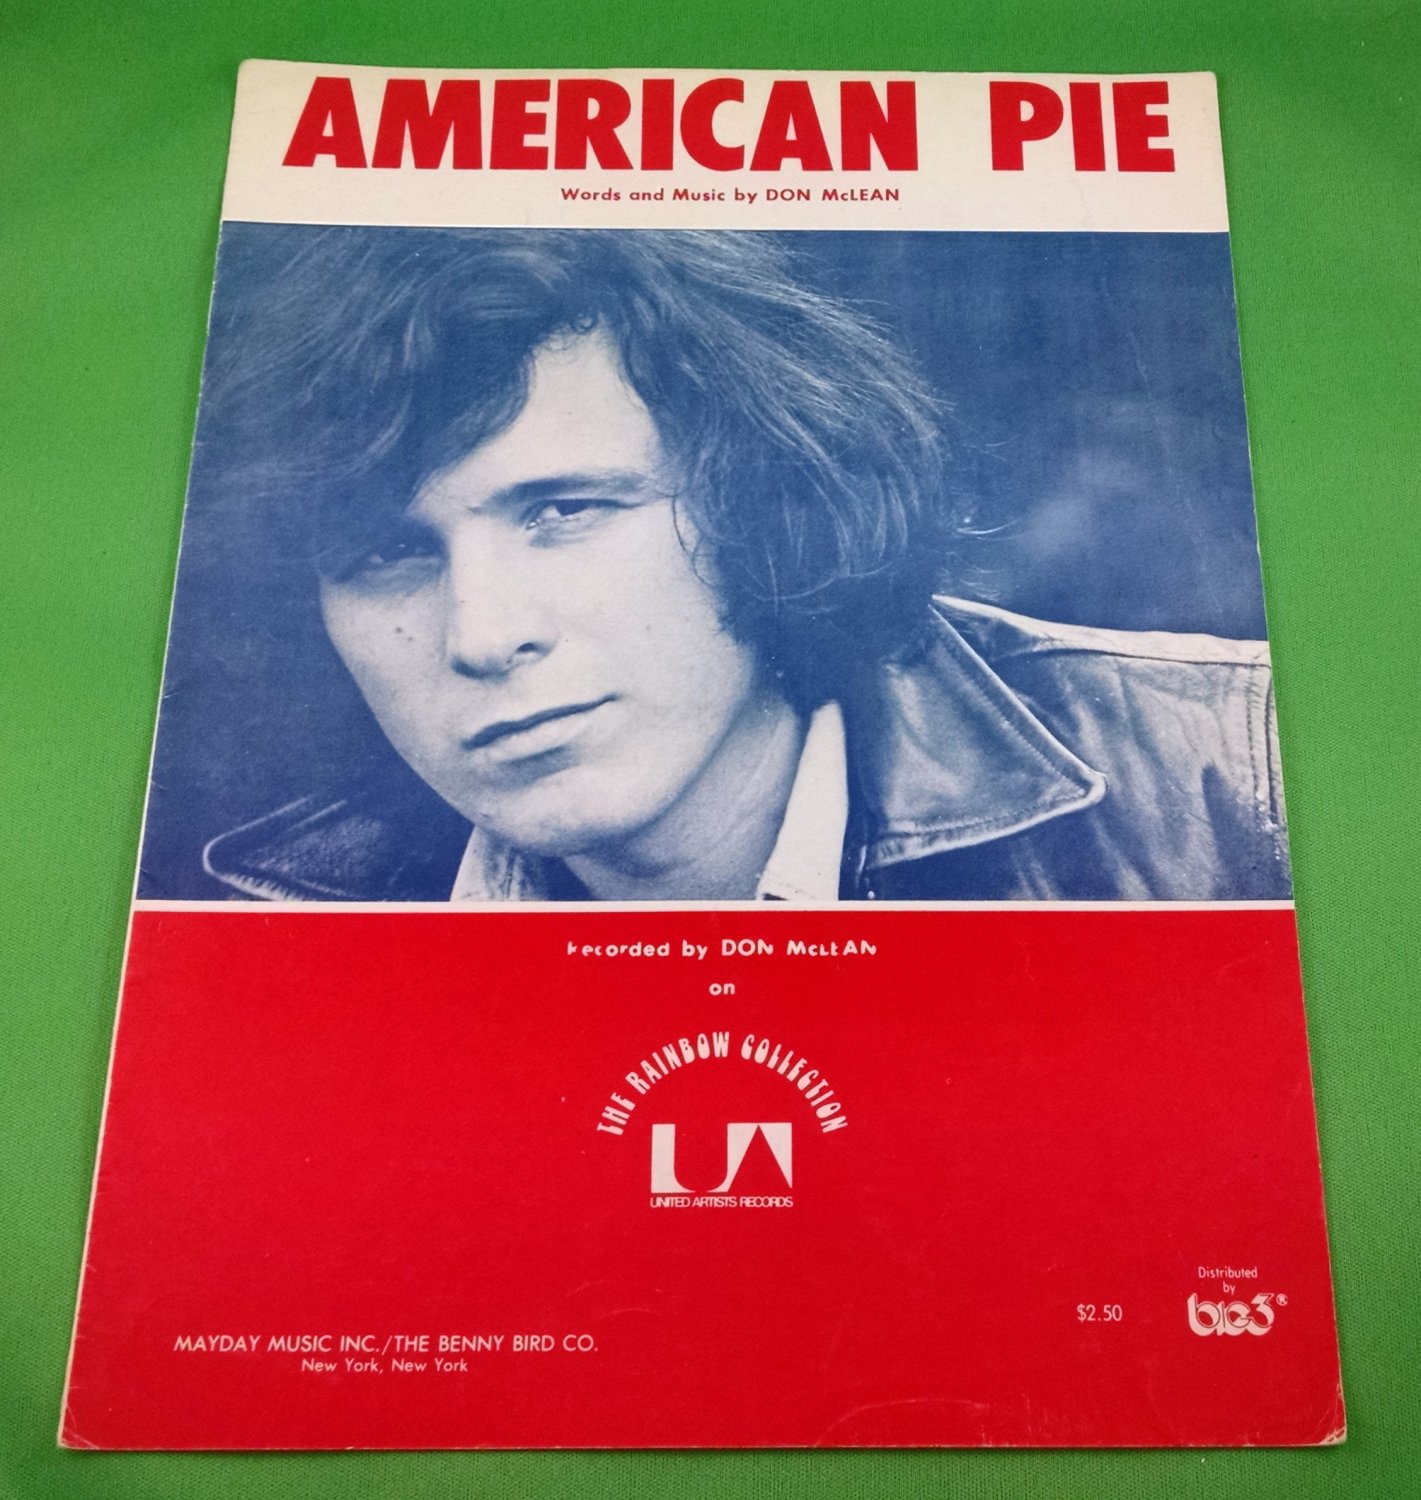 song american pie meaning